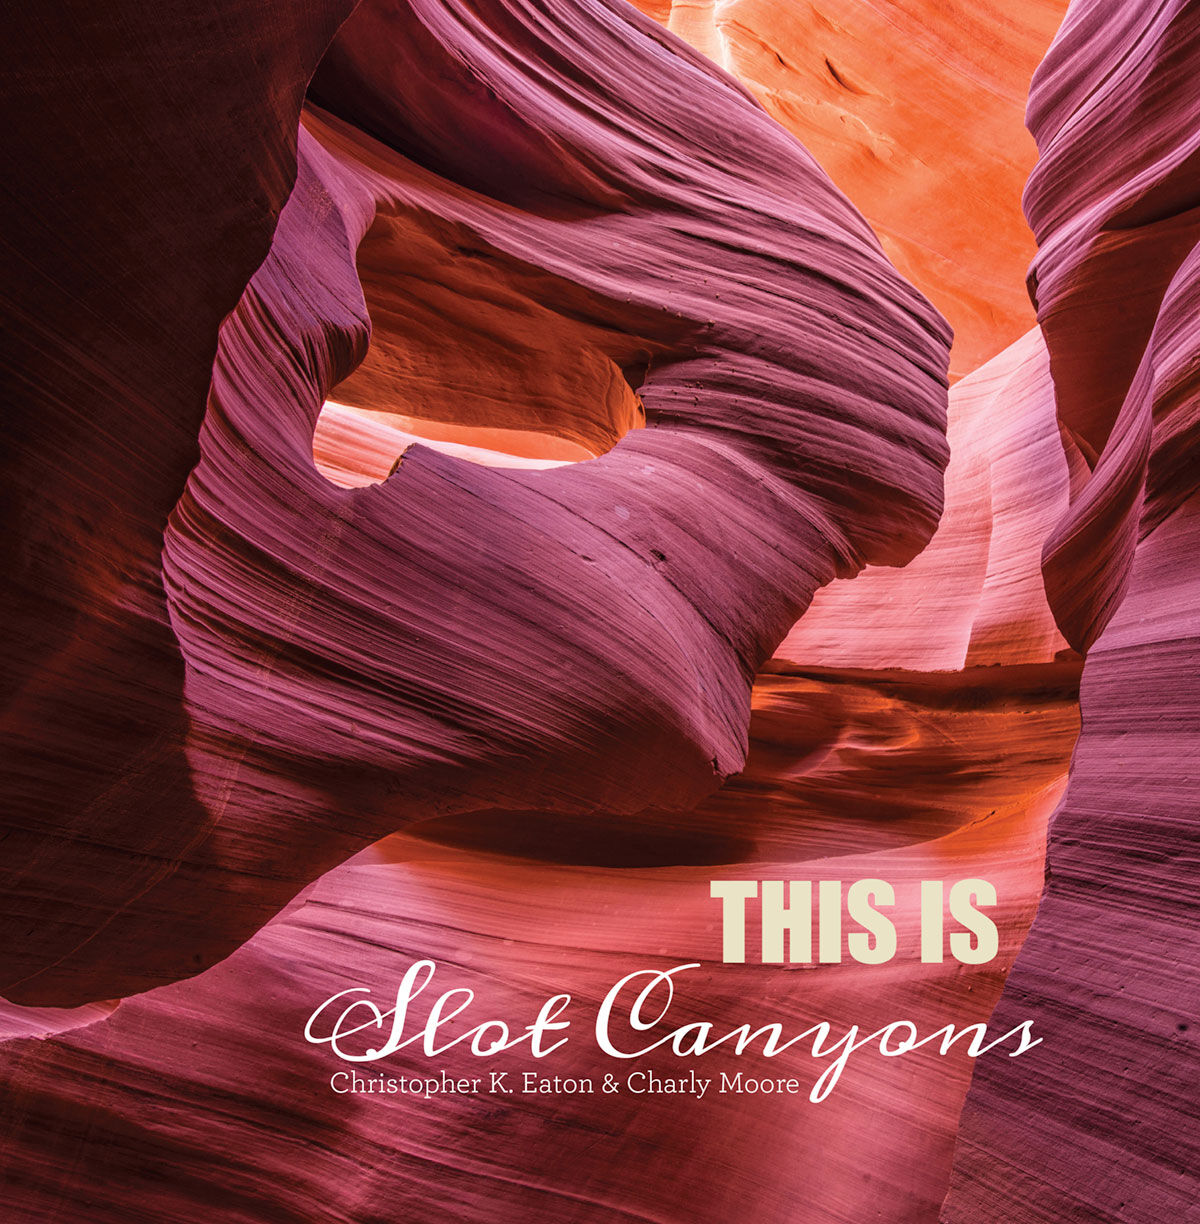 This is ... Slot Canyons book cover